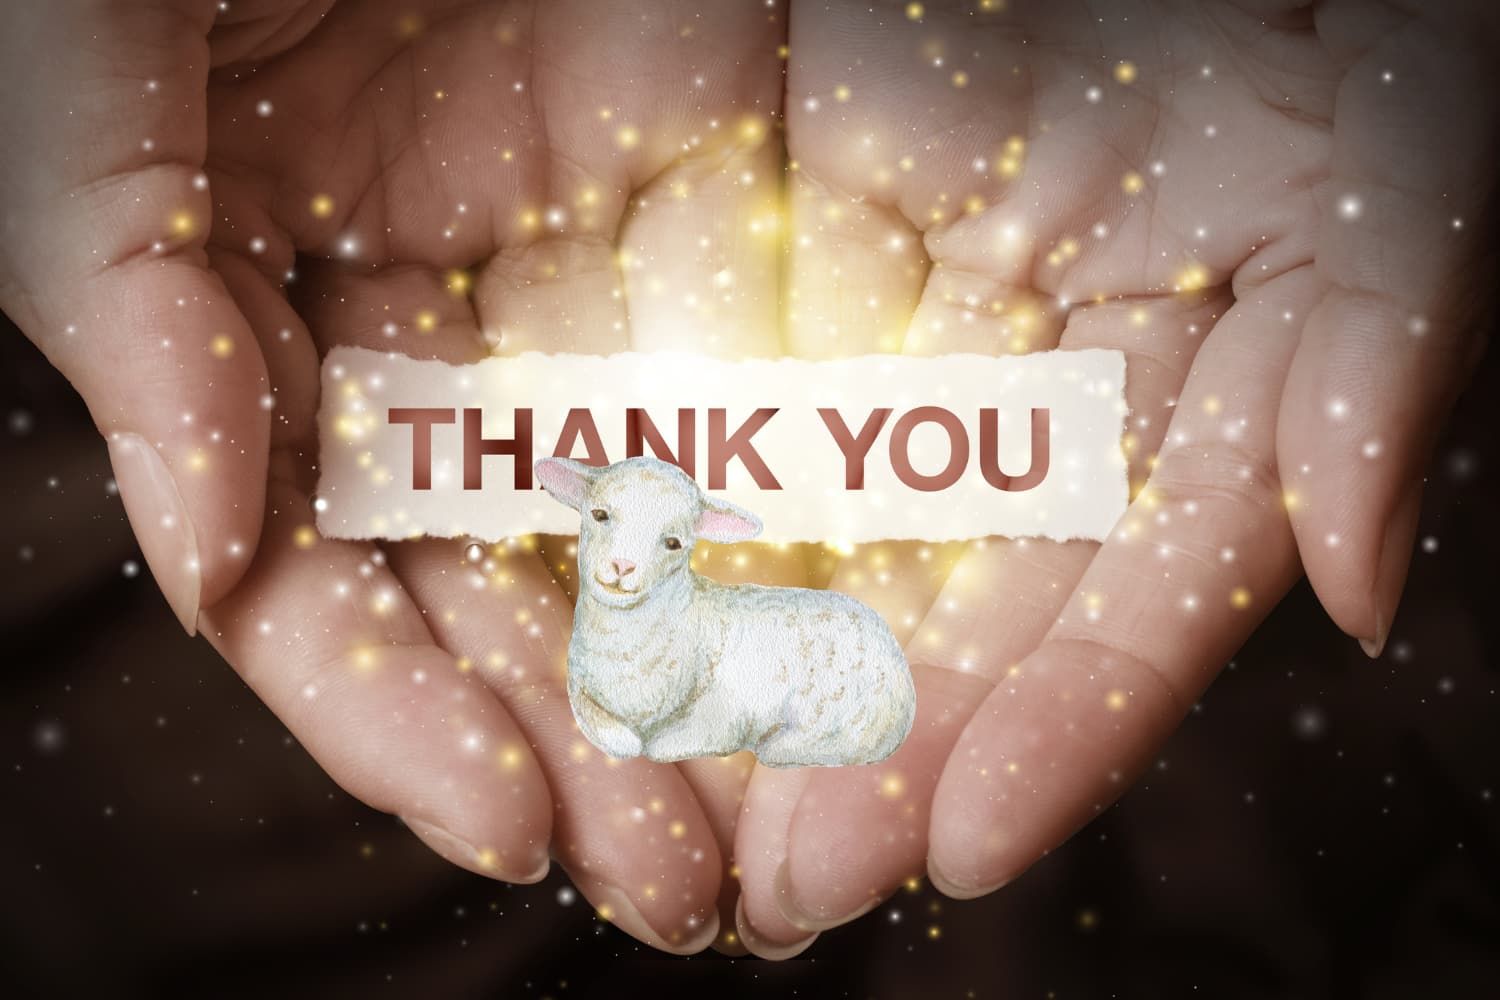 Thankful%20for%20the%20lamb-3f20e711 Obedience